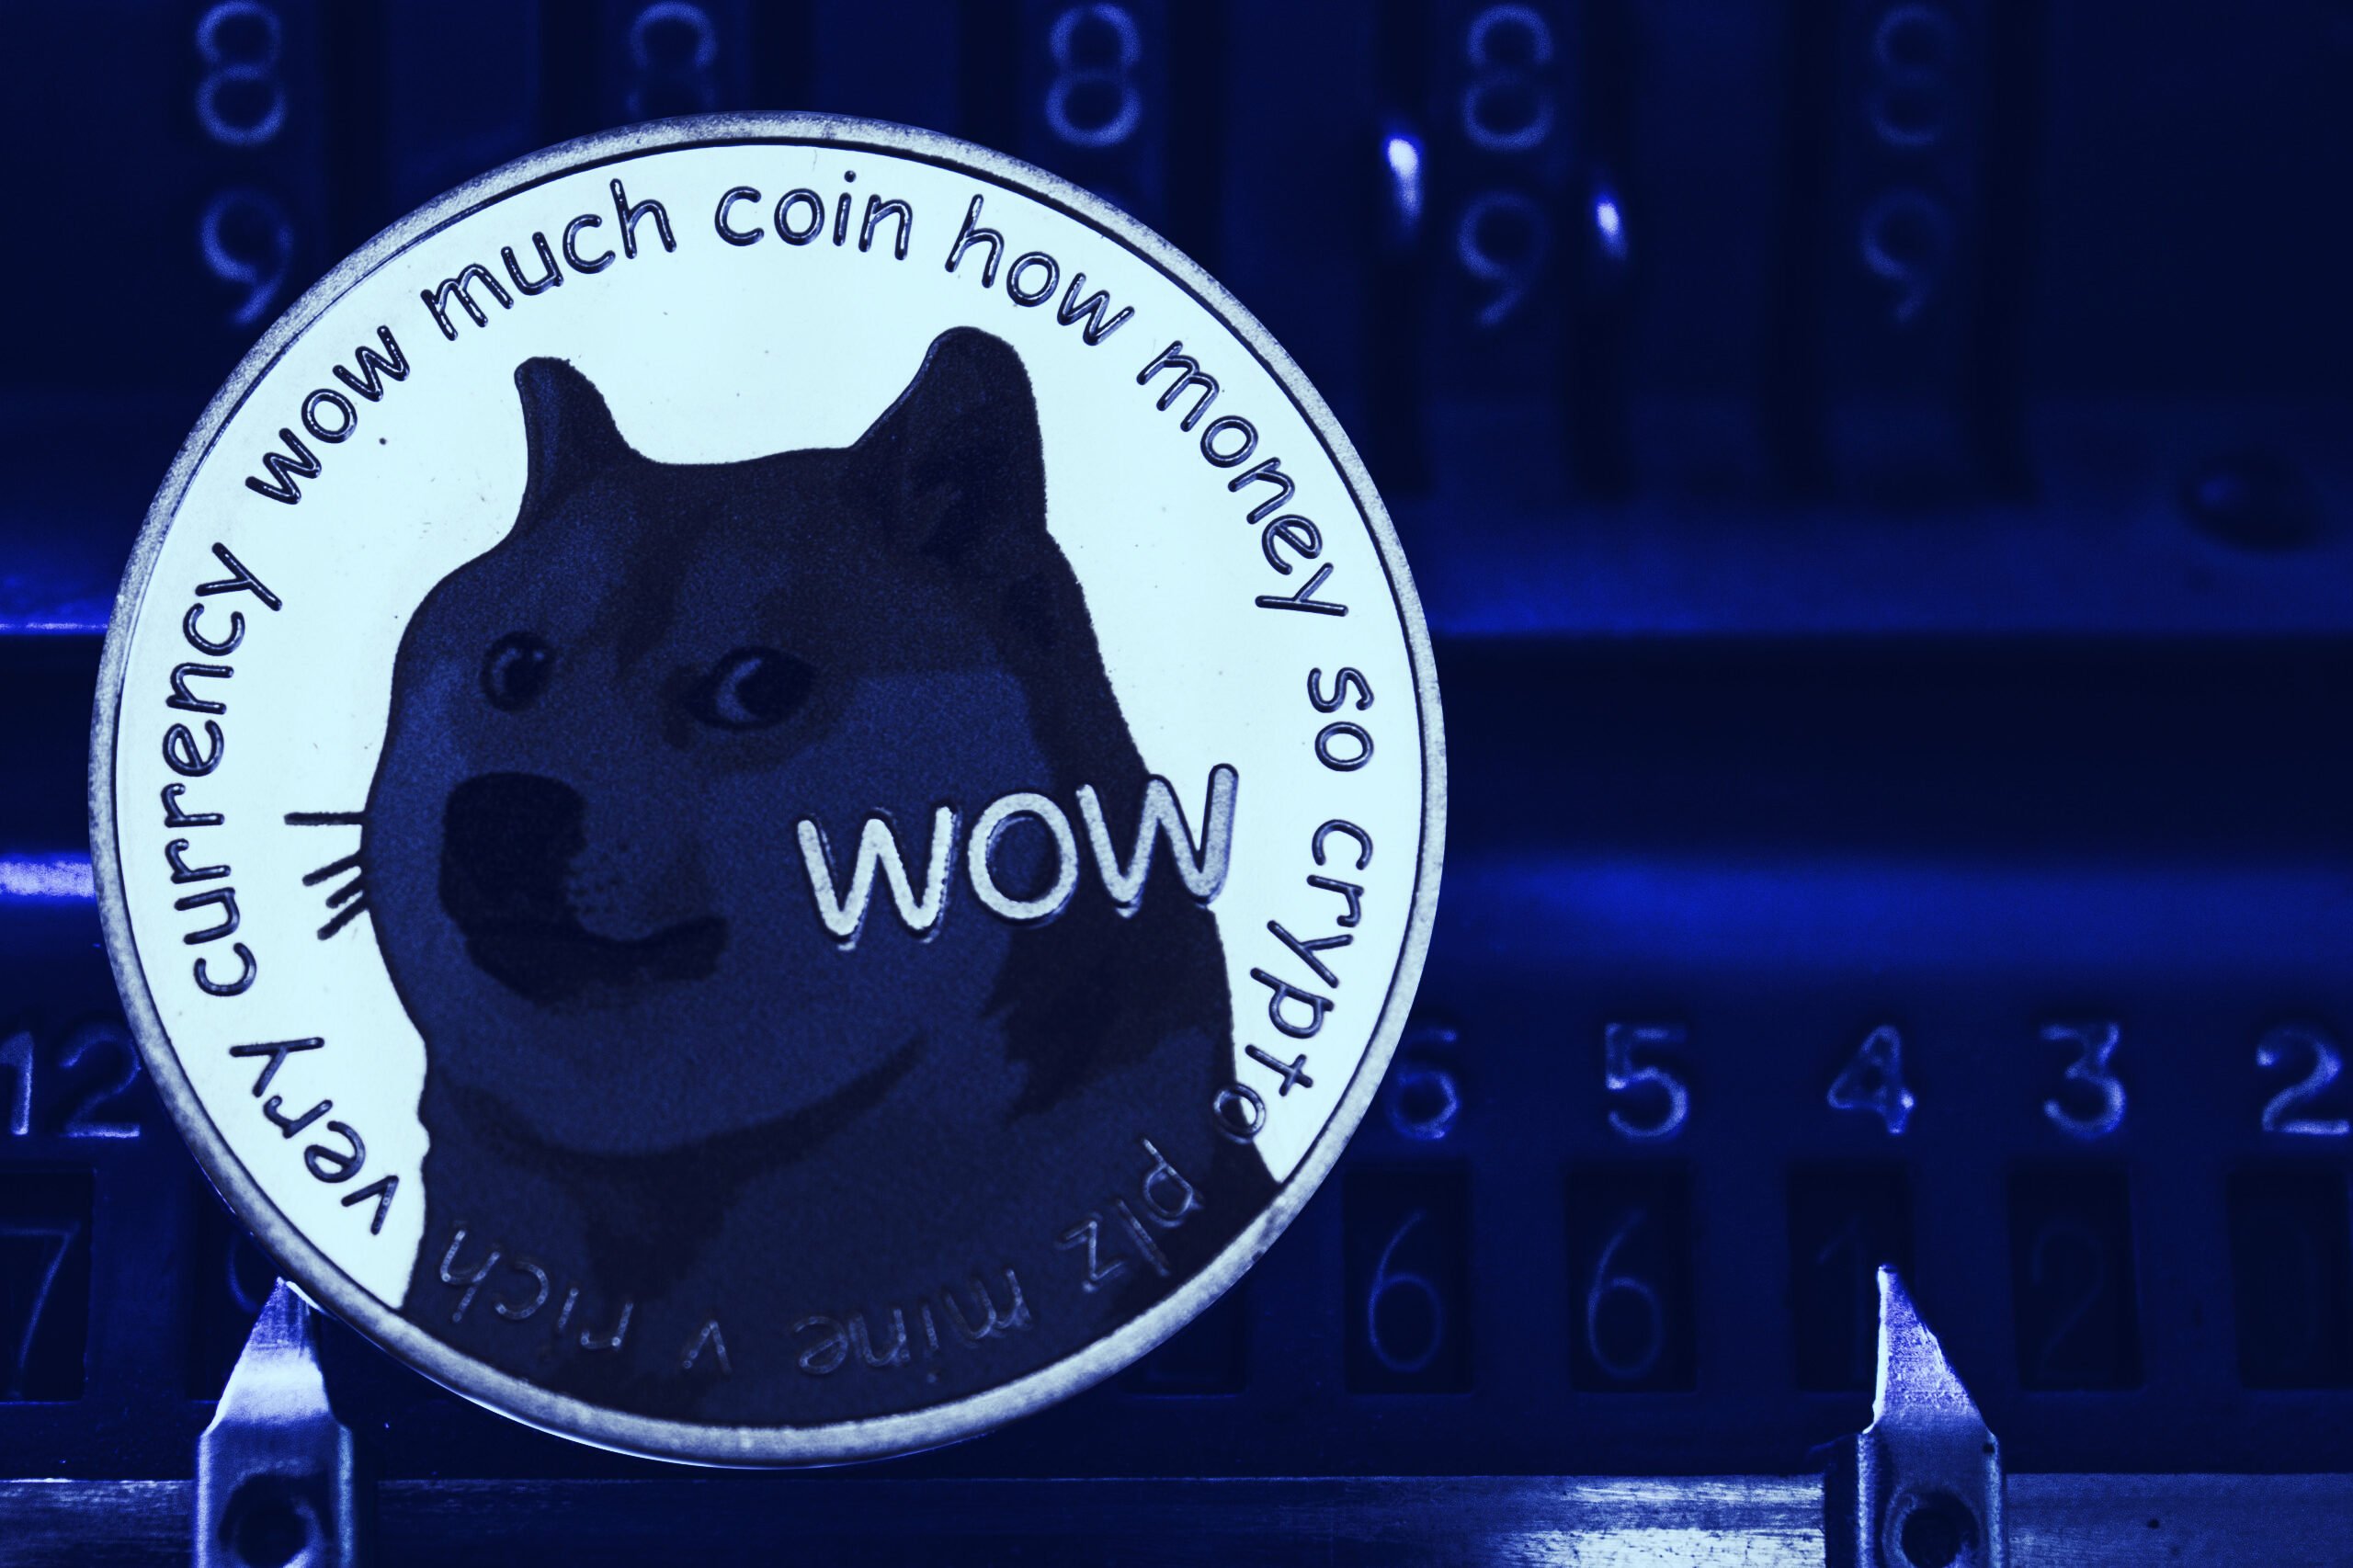 Dogecoin Price Musk : Pww0jdcbld0wjm : The price of the ...